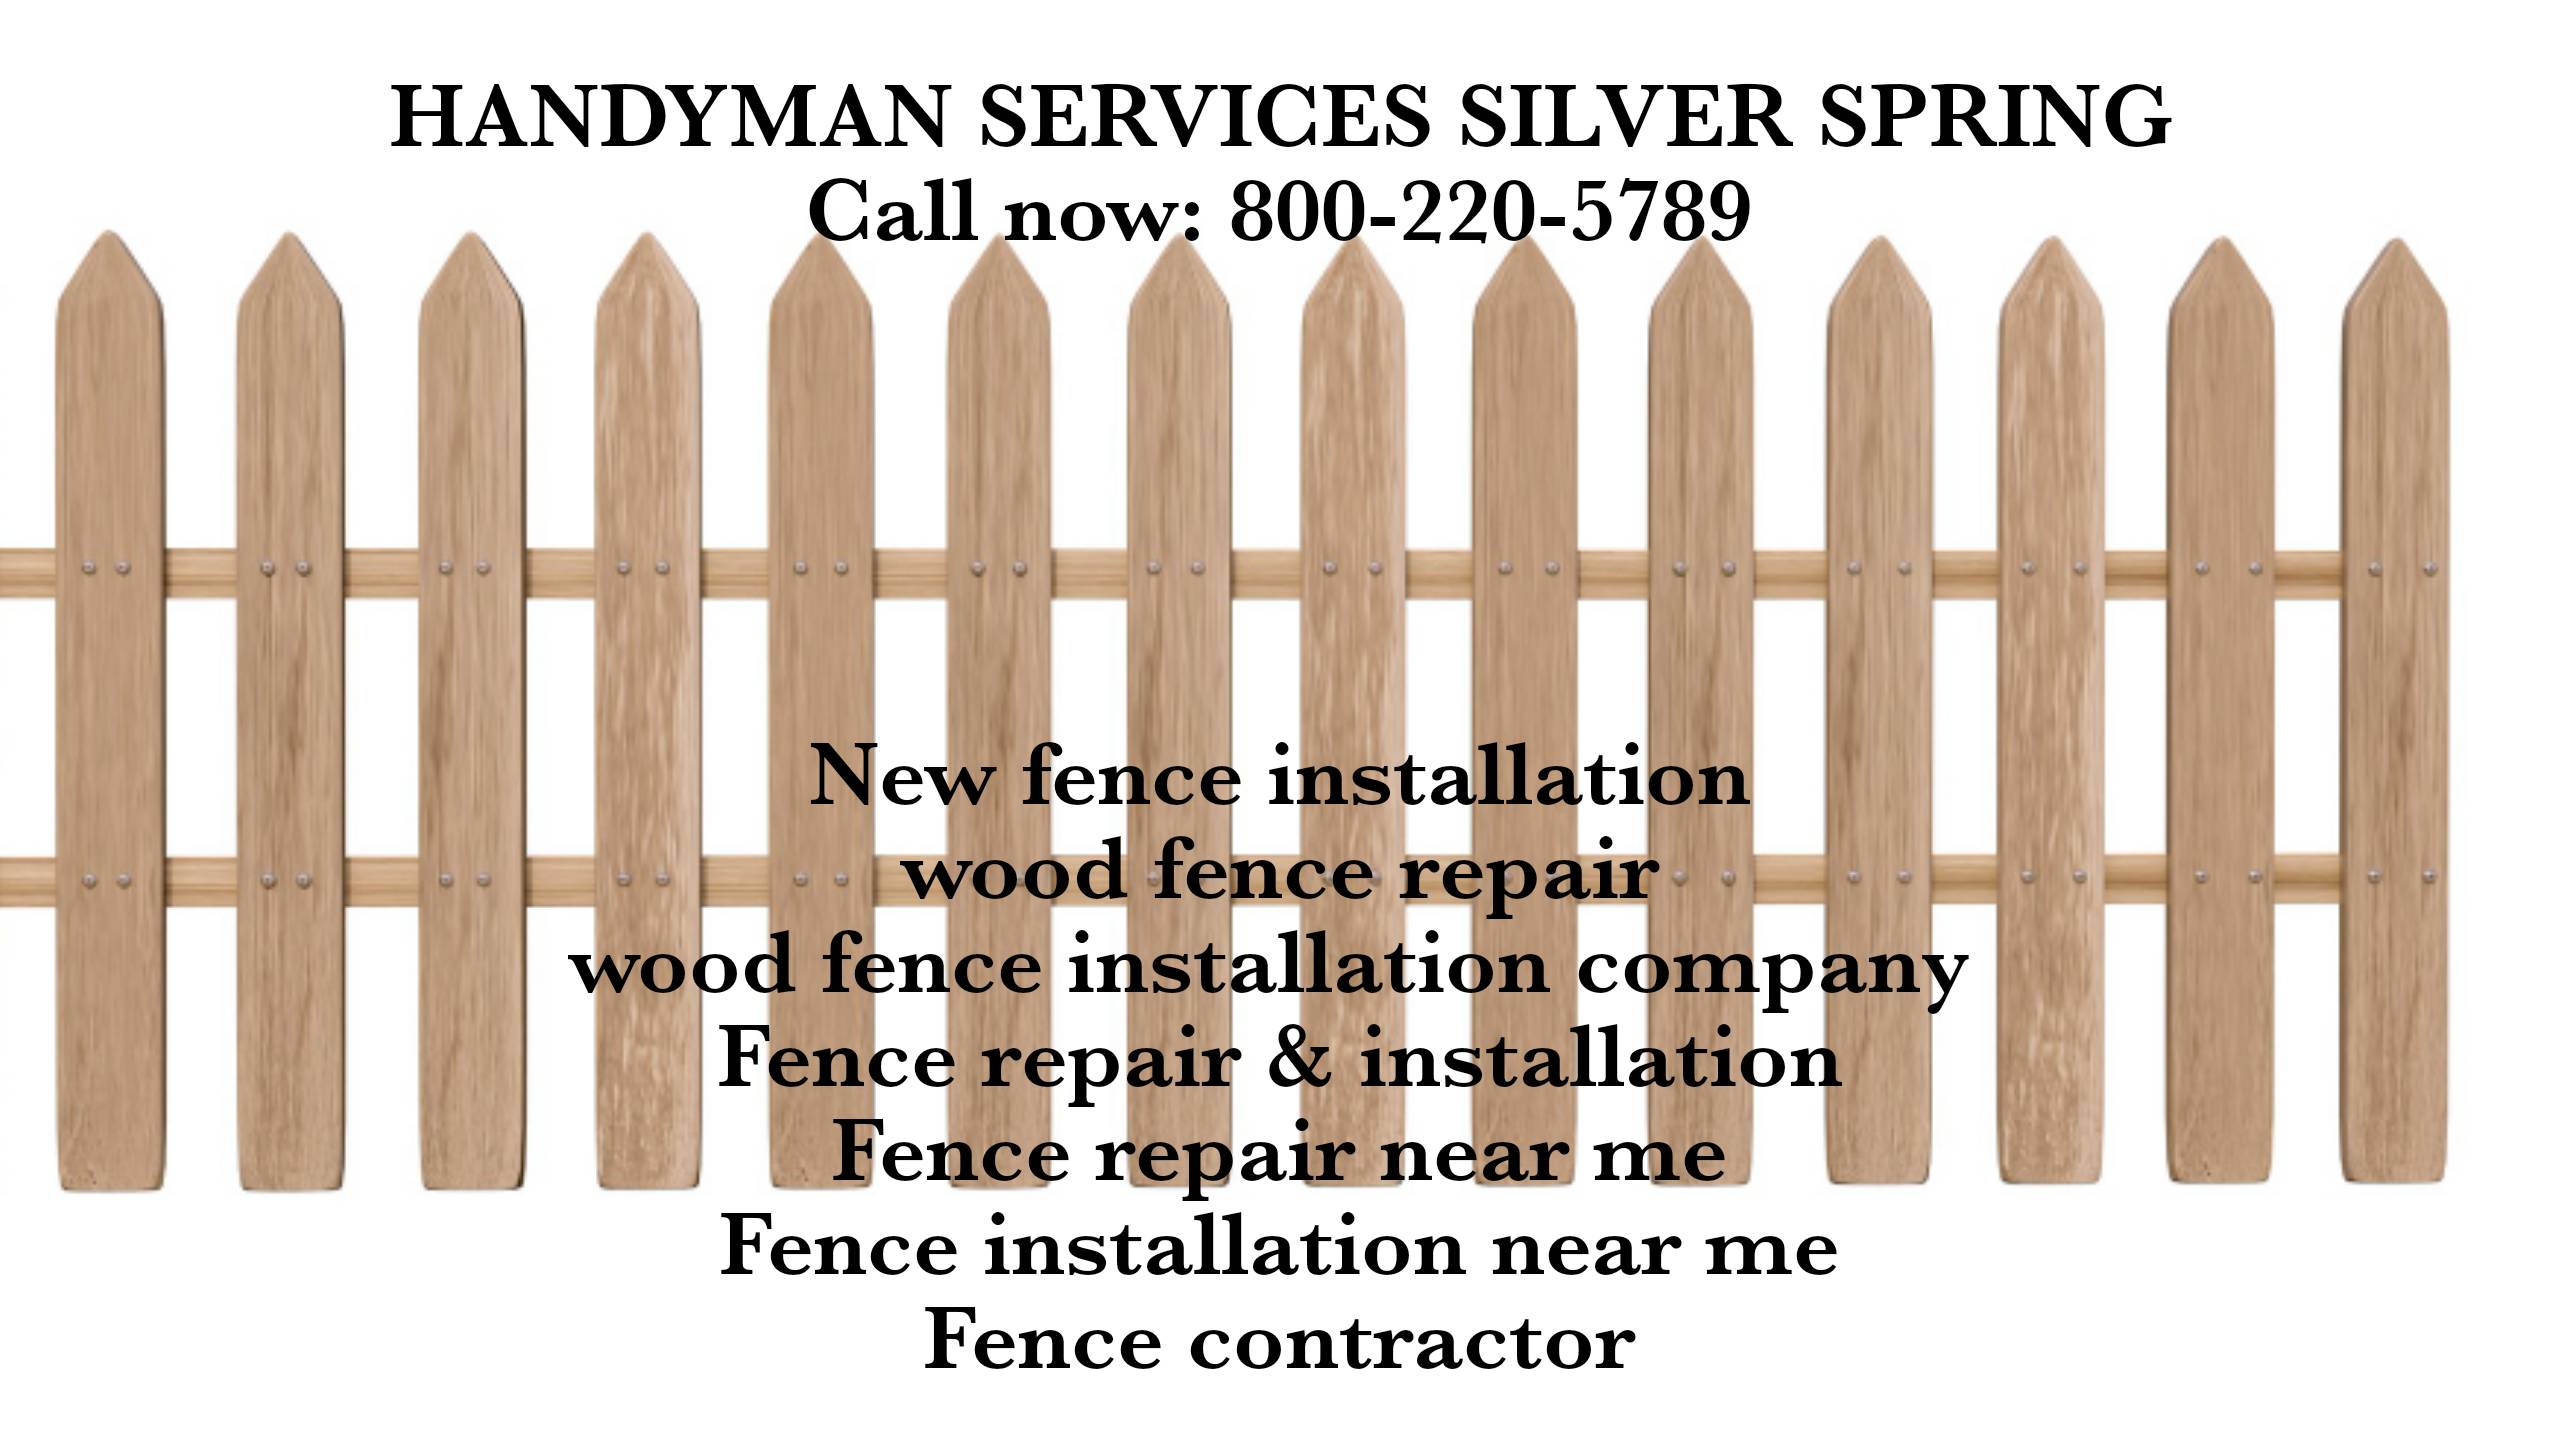 Why Do You Need Professional Fence Services?